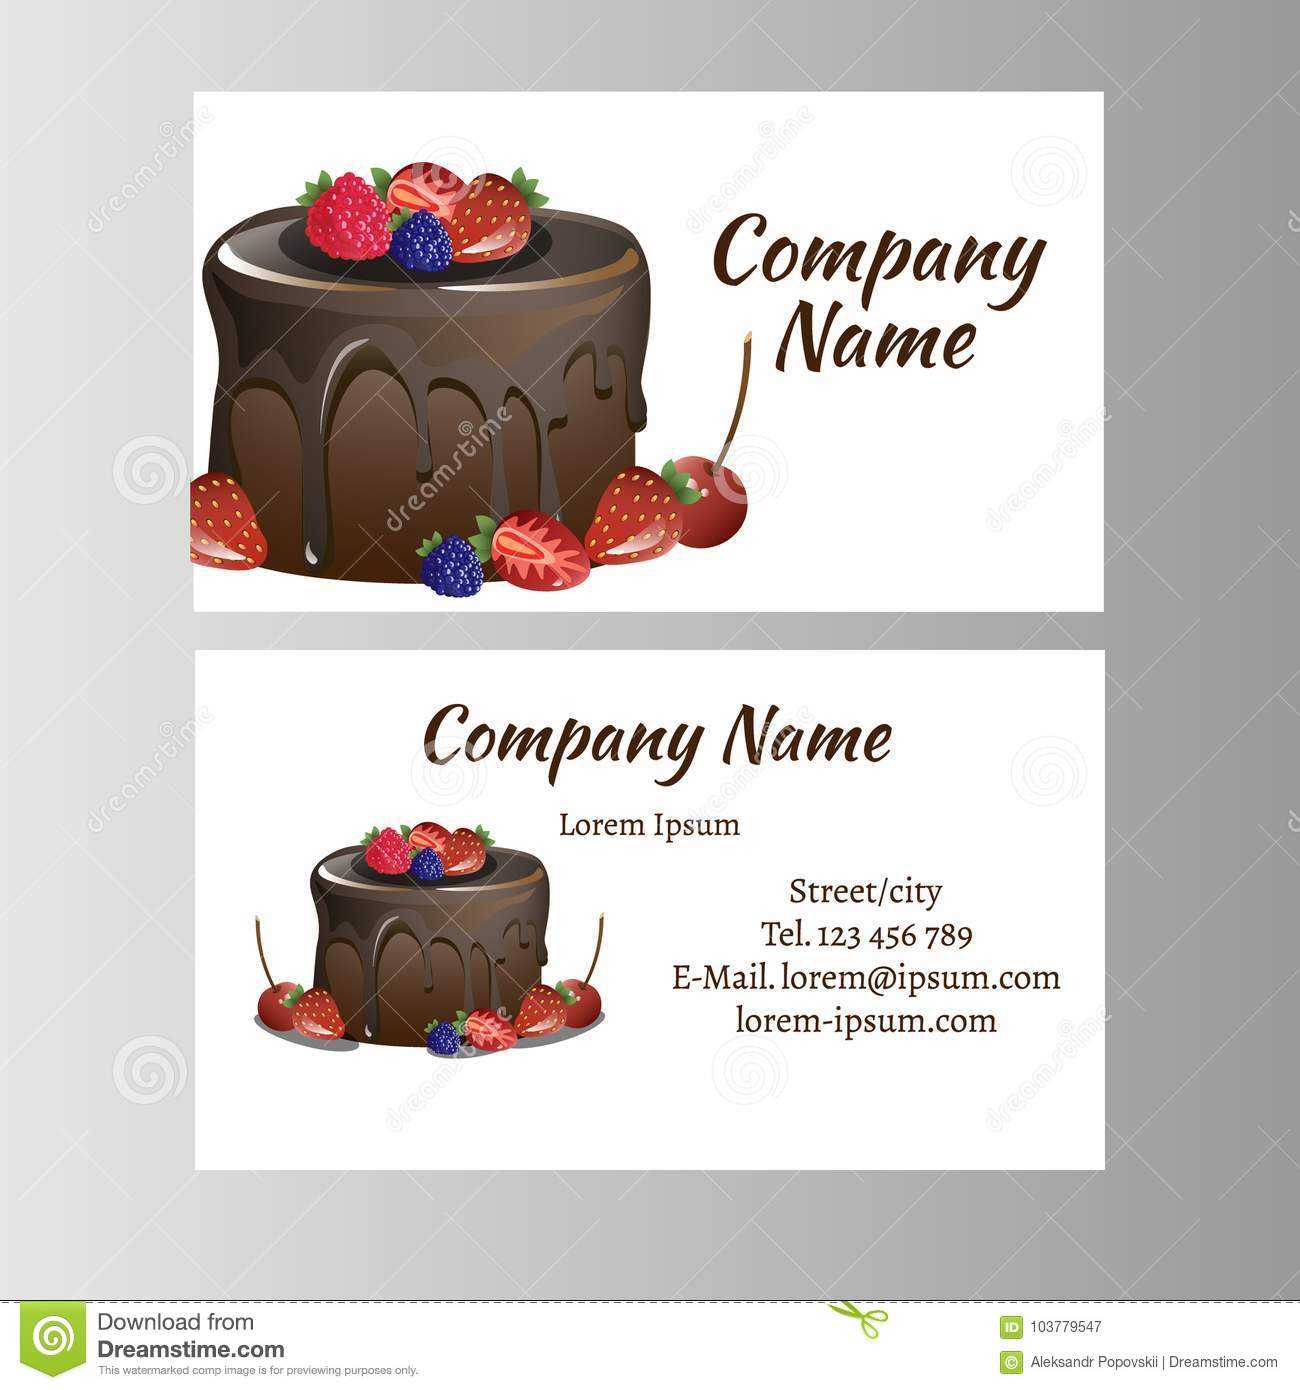 Business Card Template For Bakery Business. Stock Vector Regarding Cake Business Cards Templates Free